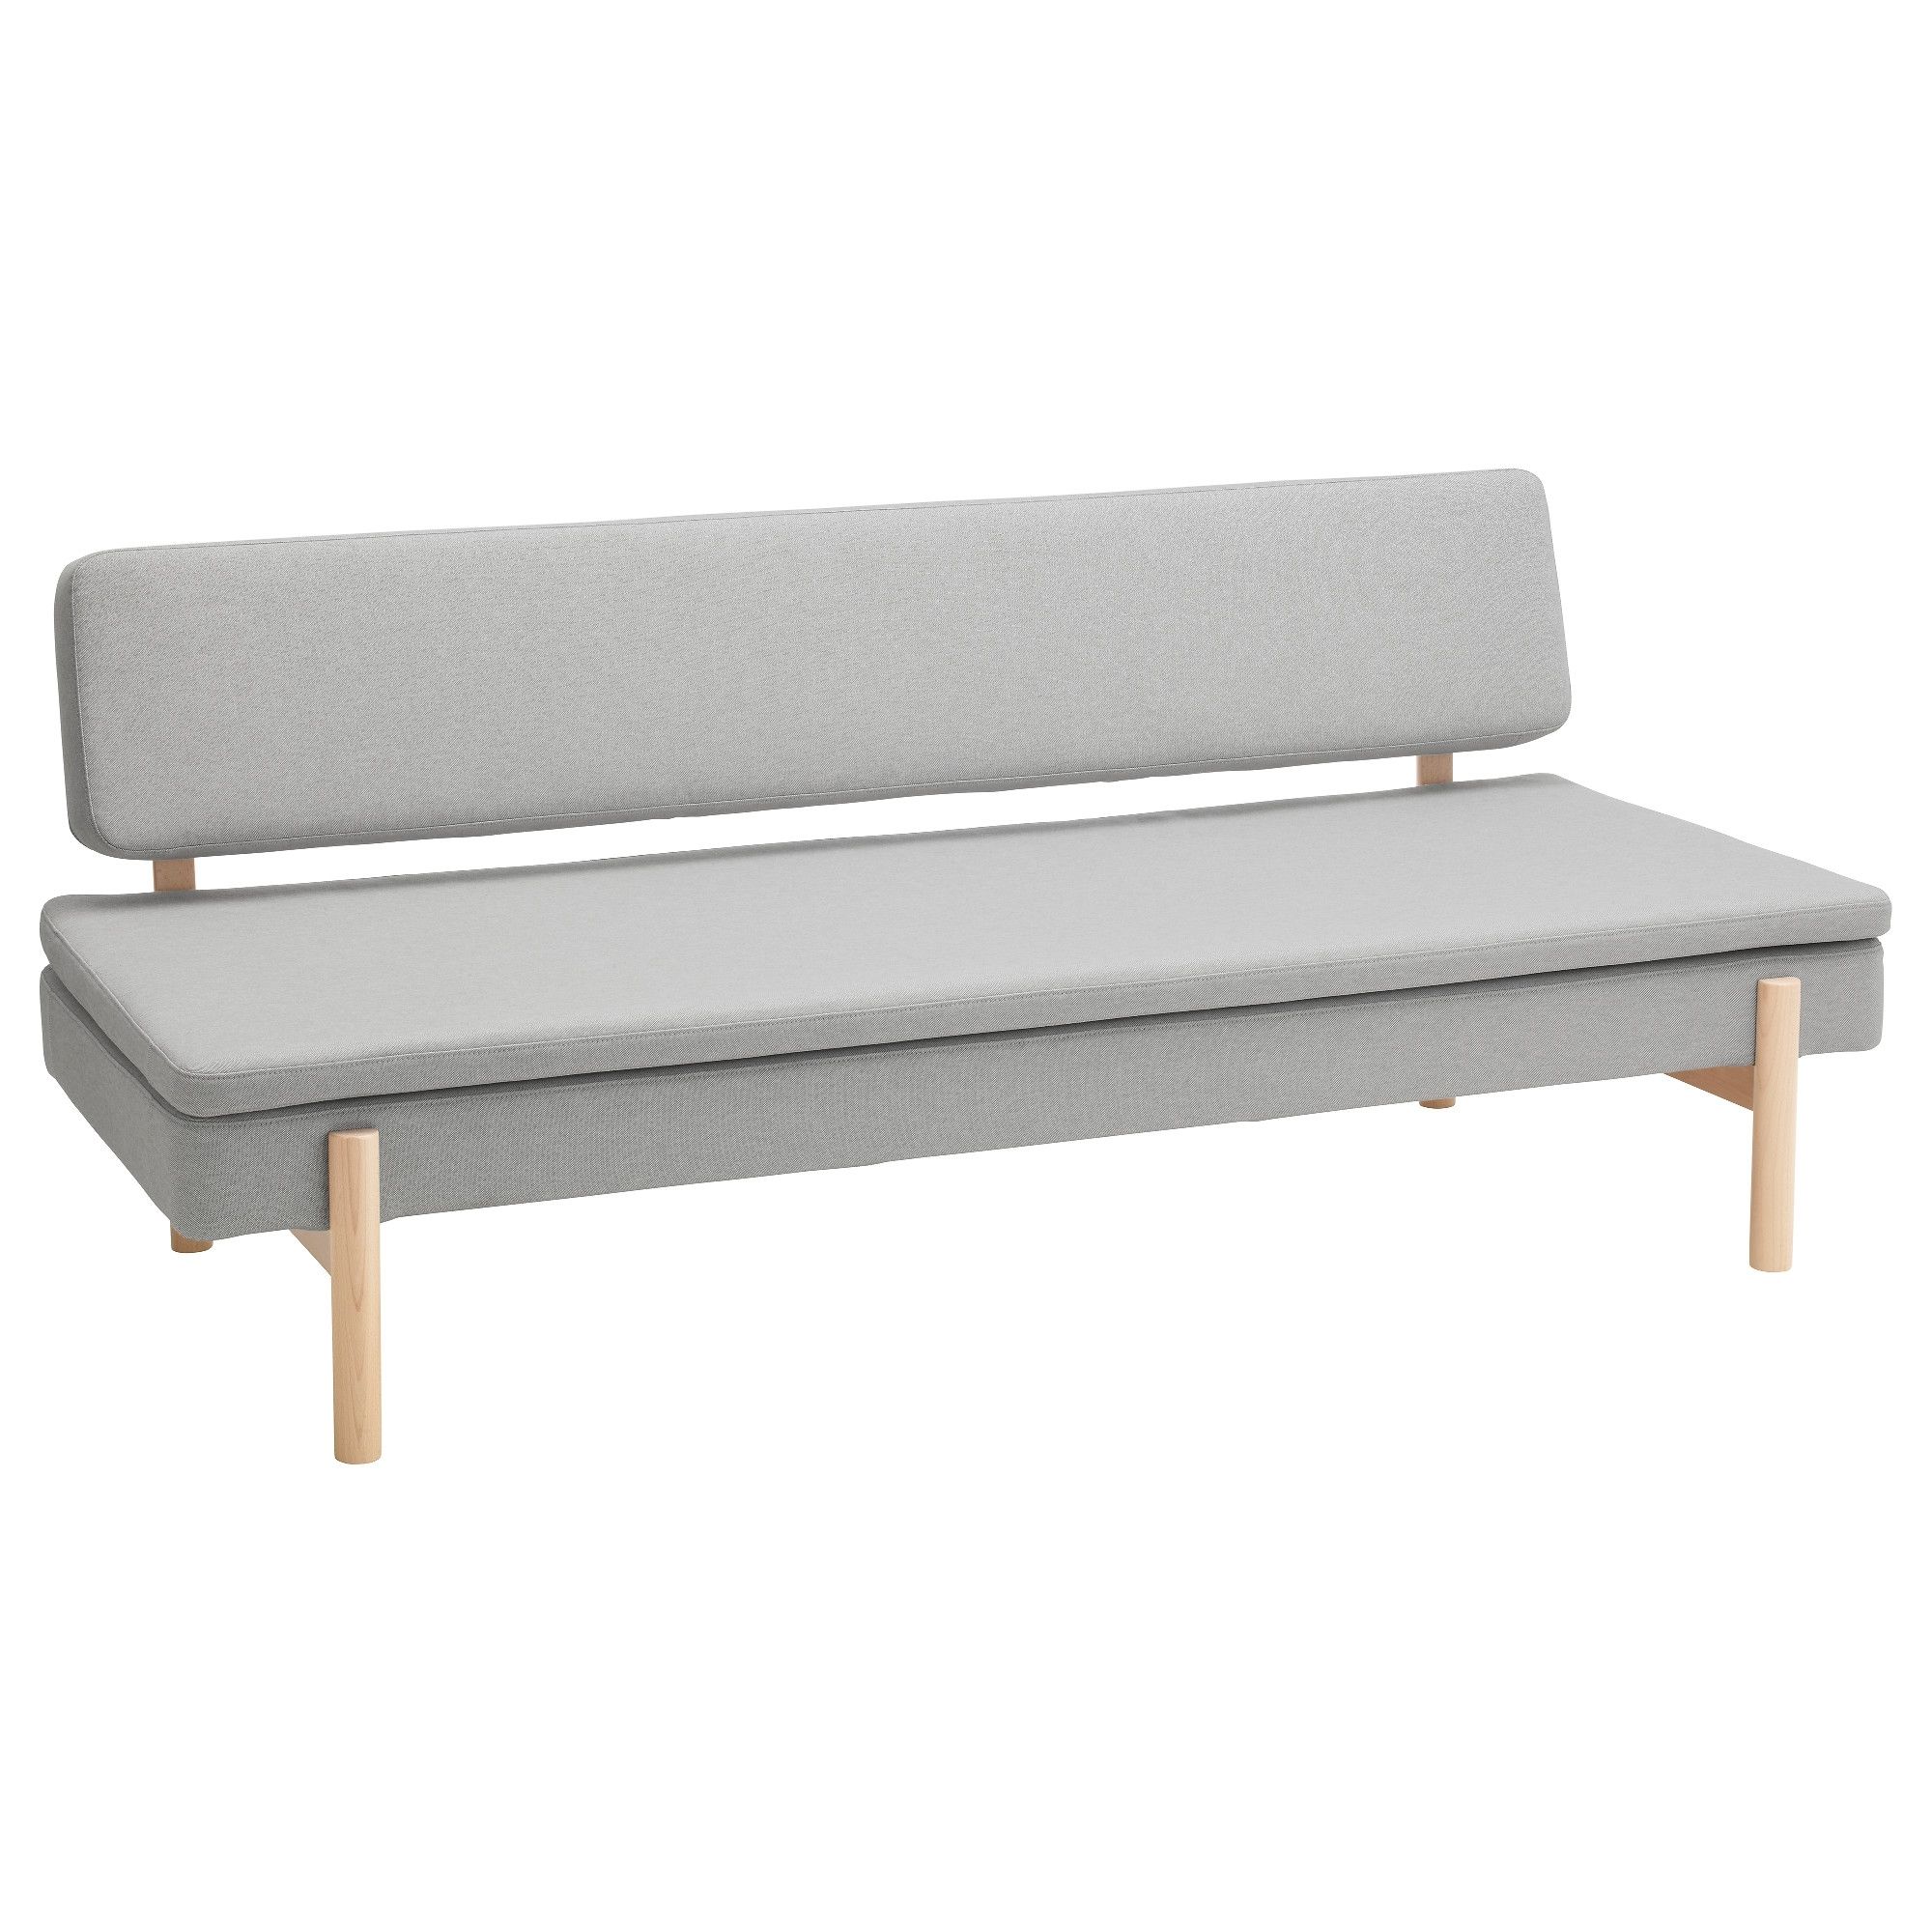 Best And Newest Ikea Small Sofas In Ypperlig 3 Seat Sleeper Sofa – Ikea (View 8 of 15)